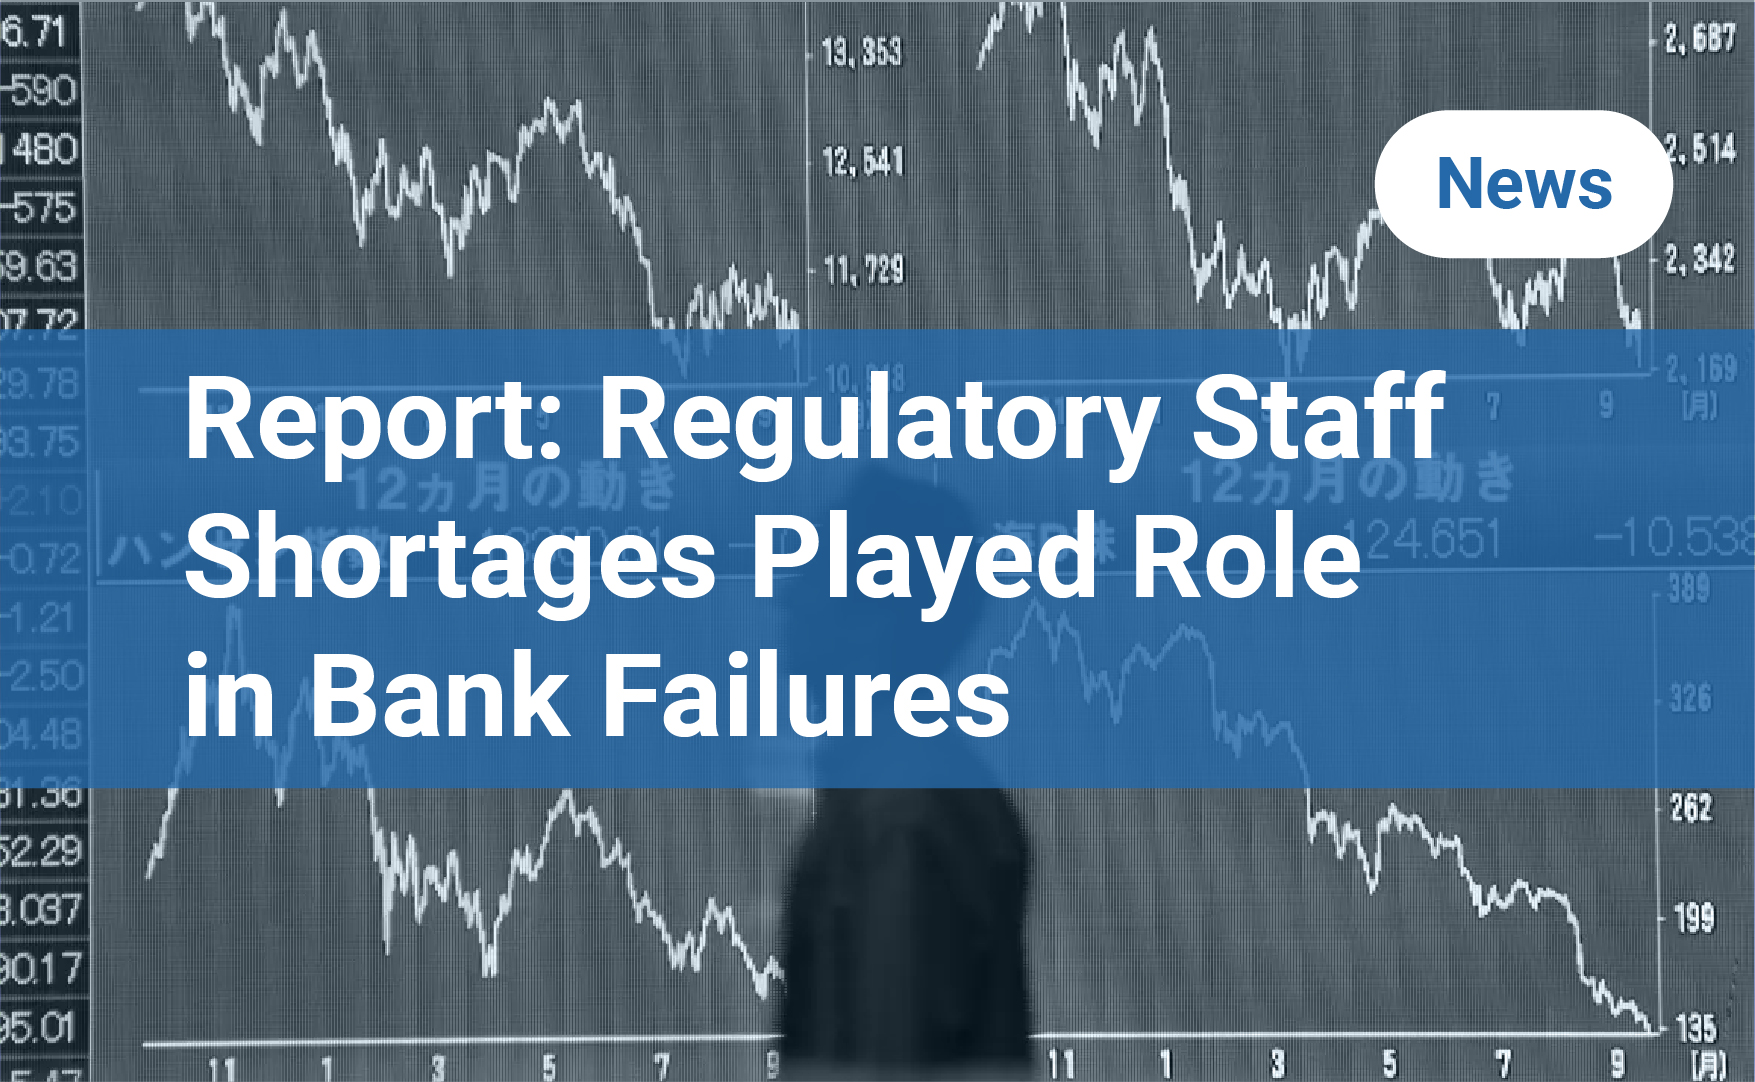 Report: Regulatory Staff Shortages Played Role in Bank Failures